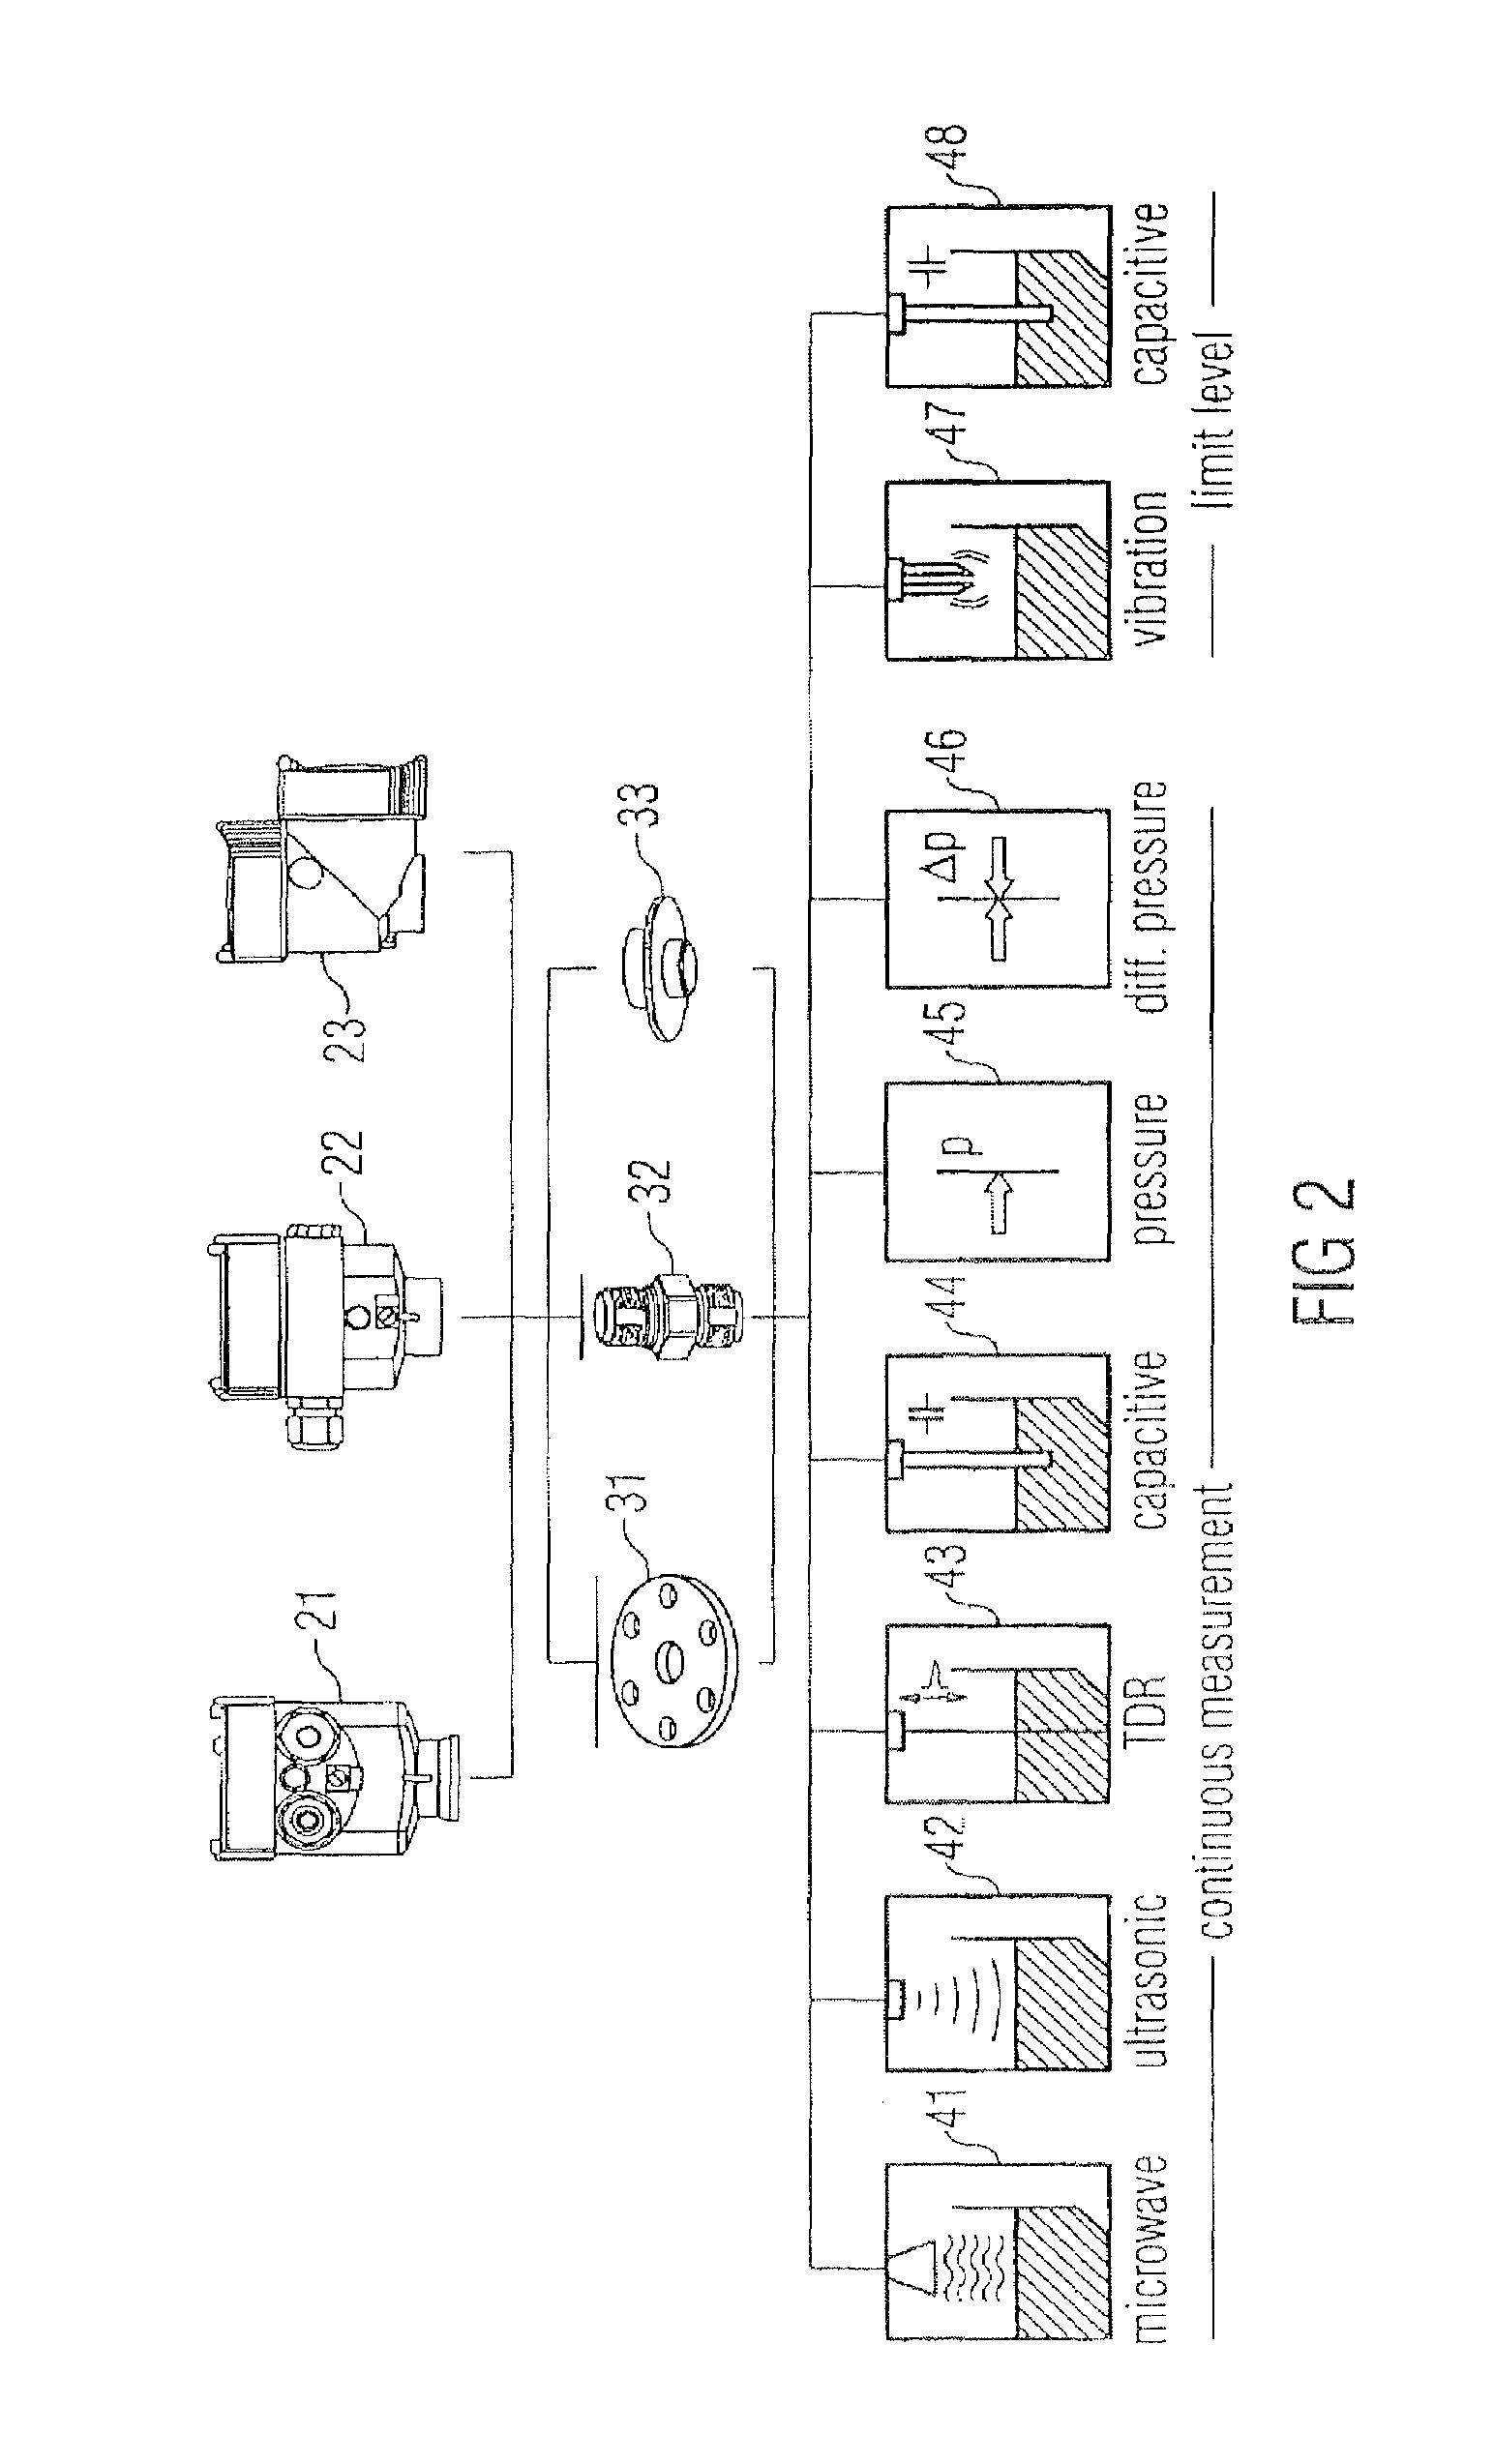 System for Manufacturing a Modularly Structured Apparatus for Determining a Physical Process Quantity, and Standardized Components